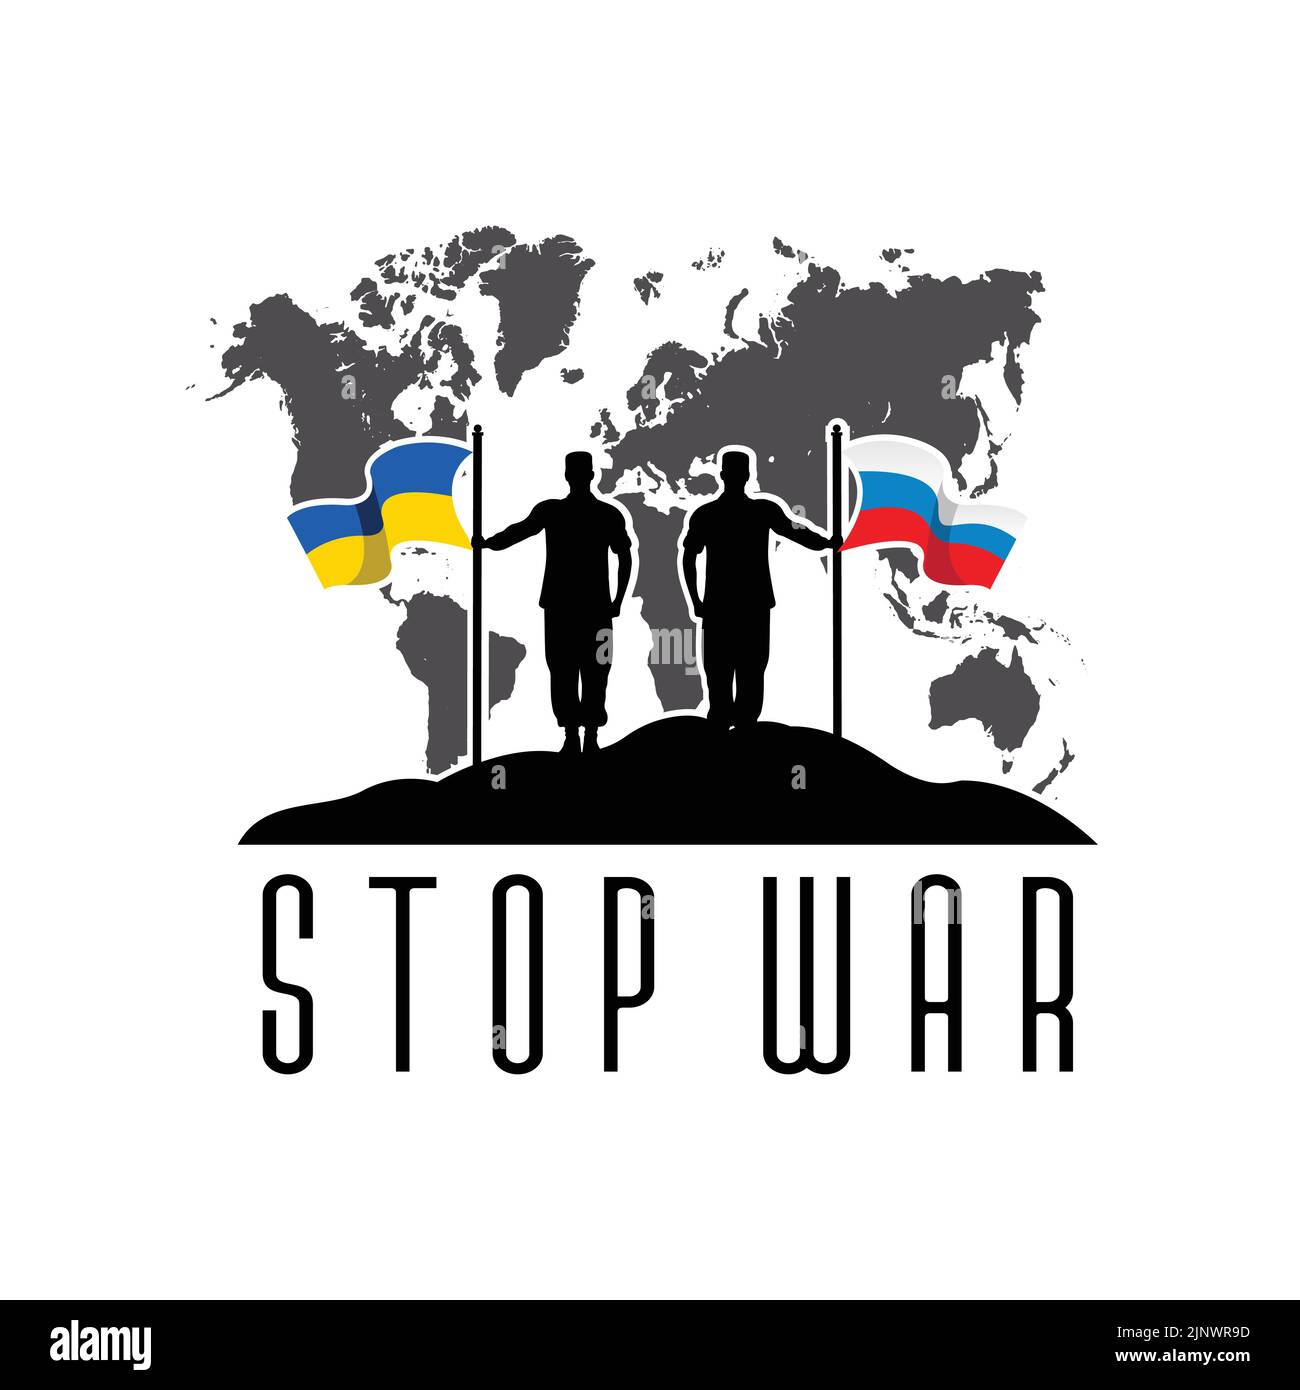 russia and ukraine conflict world war logo design, vector illustration stop war and make peace Stock Vector